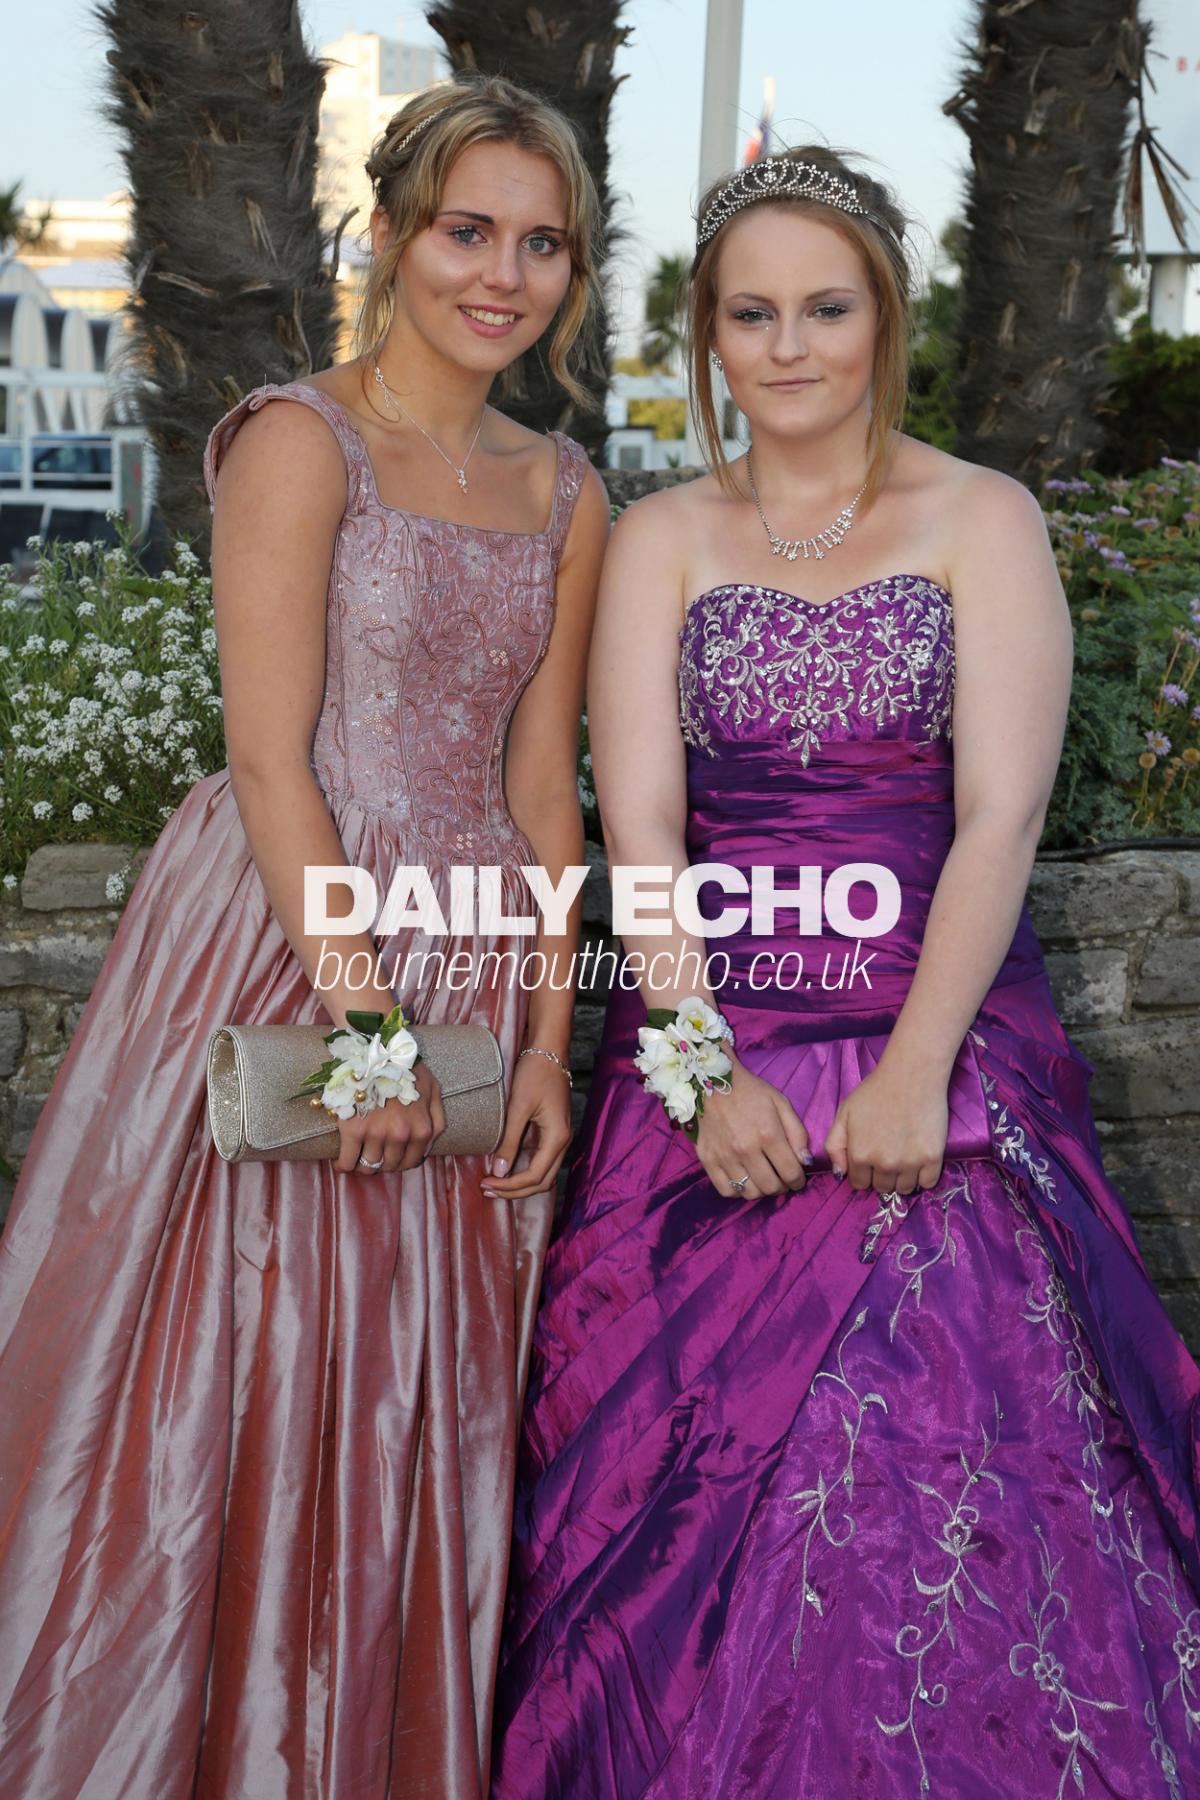 Poole High School Year 11 prom at The Cumberland Hotel in Bournemouth on 1st July 2014